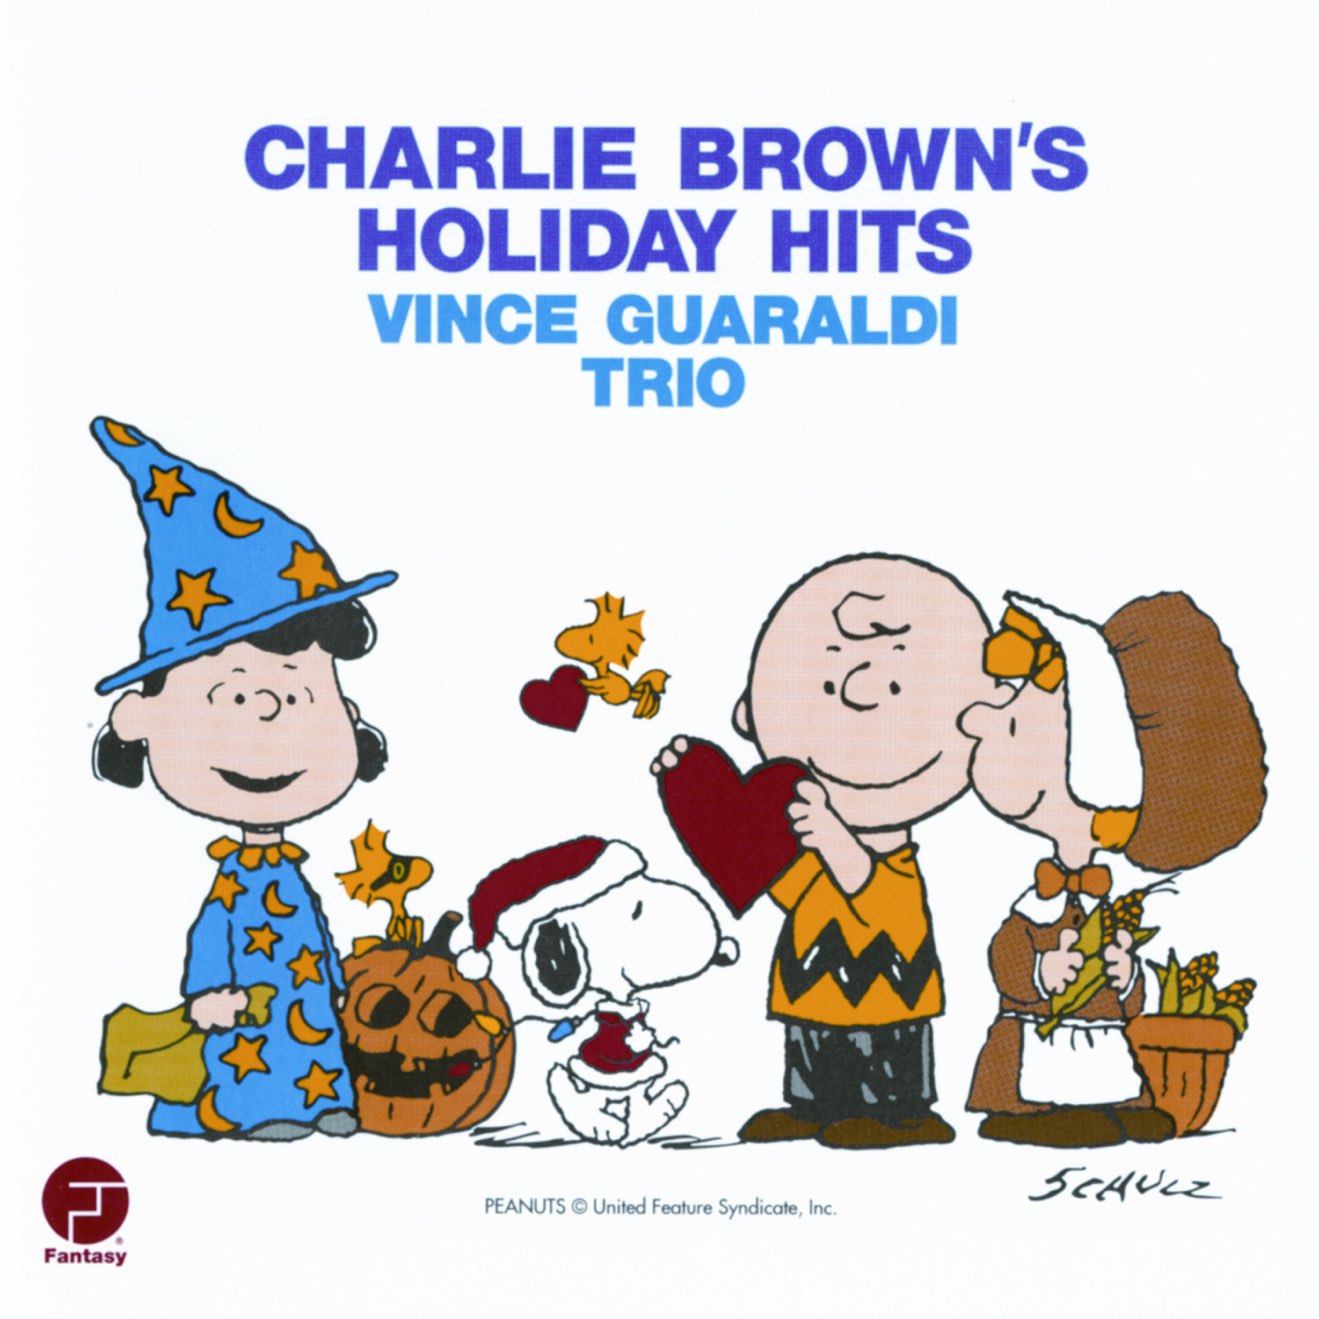 Vince Guaraldi Trio – Charlie Brown Holiday Hits (Remastered) (1998) [iTunes Match M4A]